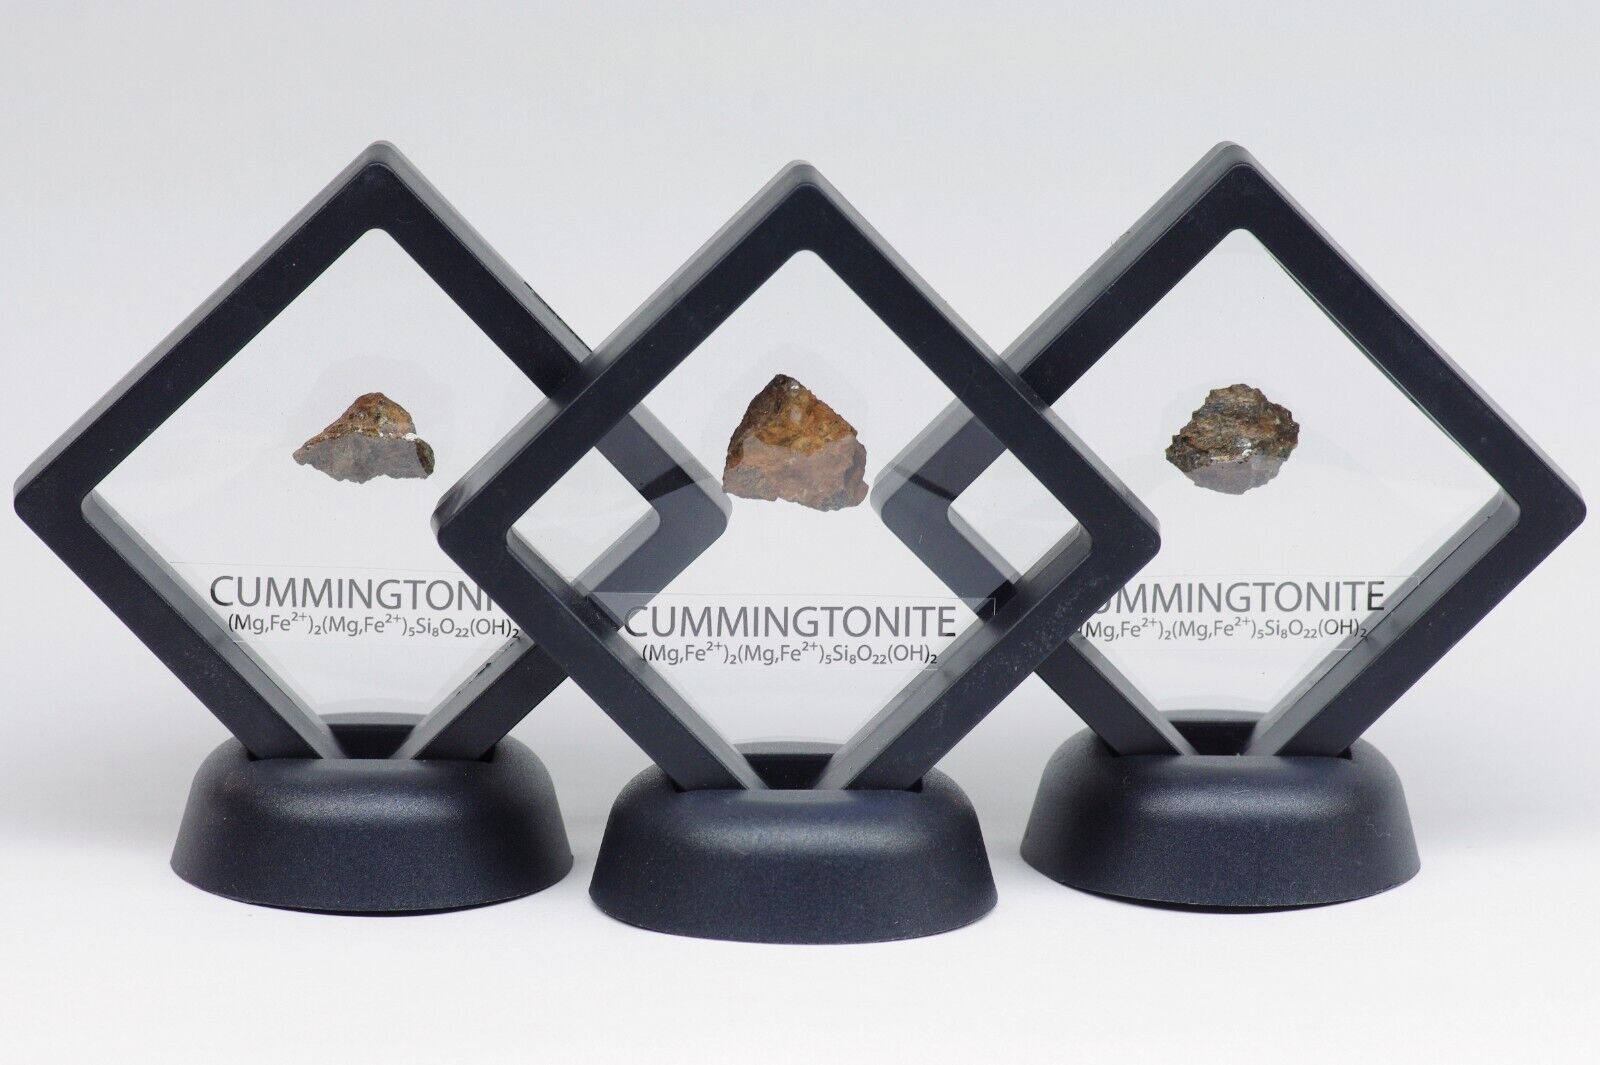 Cummingtonite mineral specimen in display frame, fun funny gag gift collectible